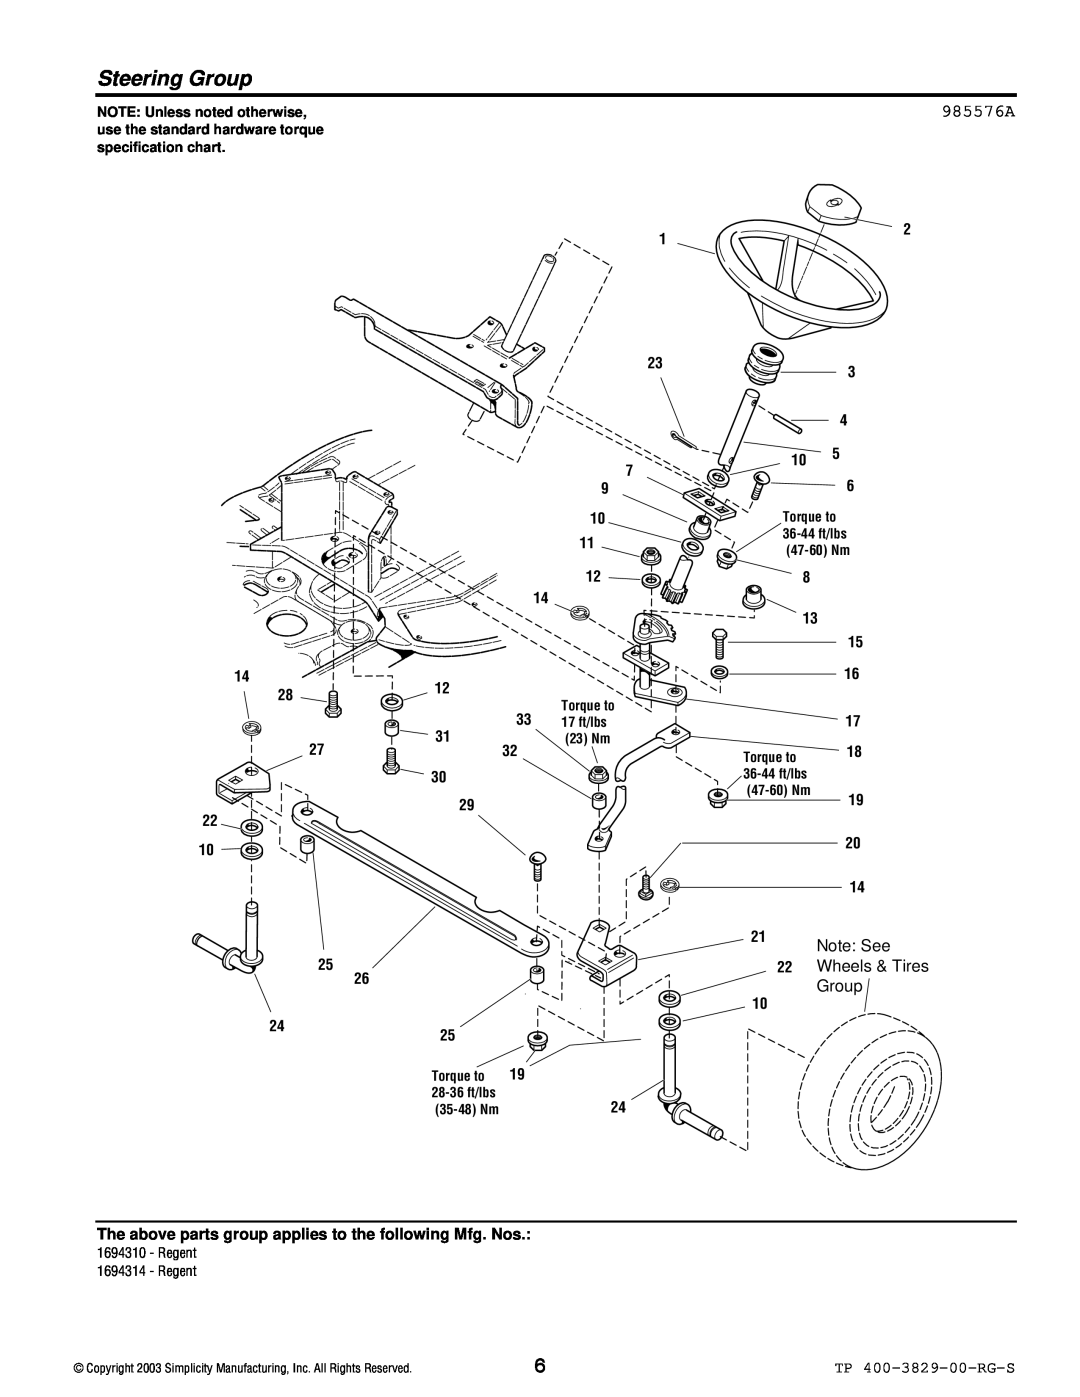 Simplicity 1693920 Steering Group, 985576A, TP 400-3829-00-RG-S, NOTE Unless noted otherwise, 17 ft/lbs, 23 Nm, Torque to 